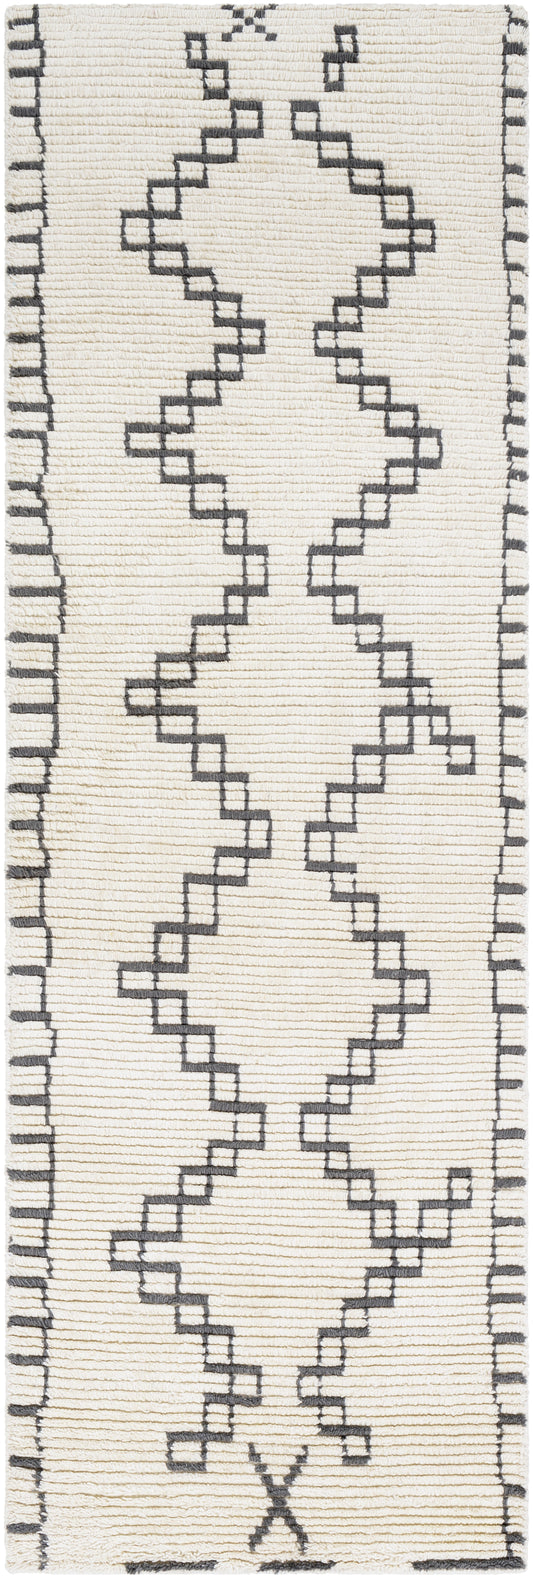 Beni Ourain 24184 Hand Woven Wool Indoor Area Rug by Surya Rugs